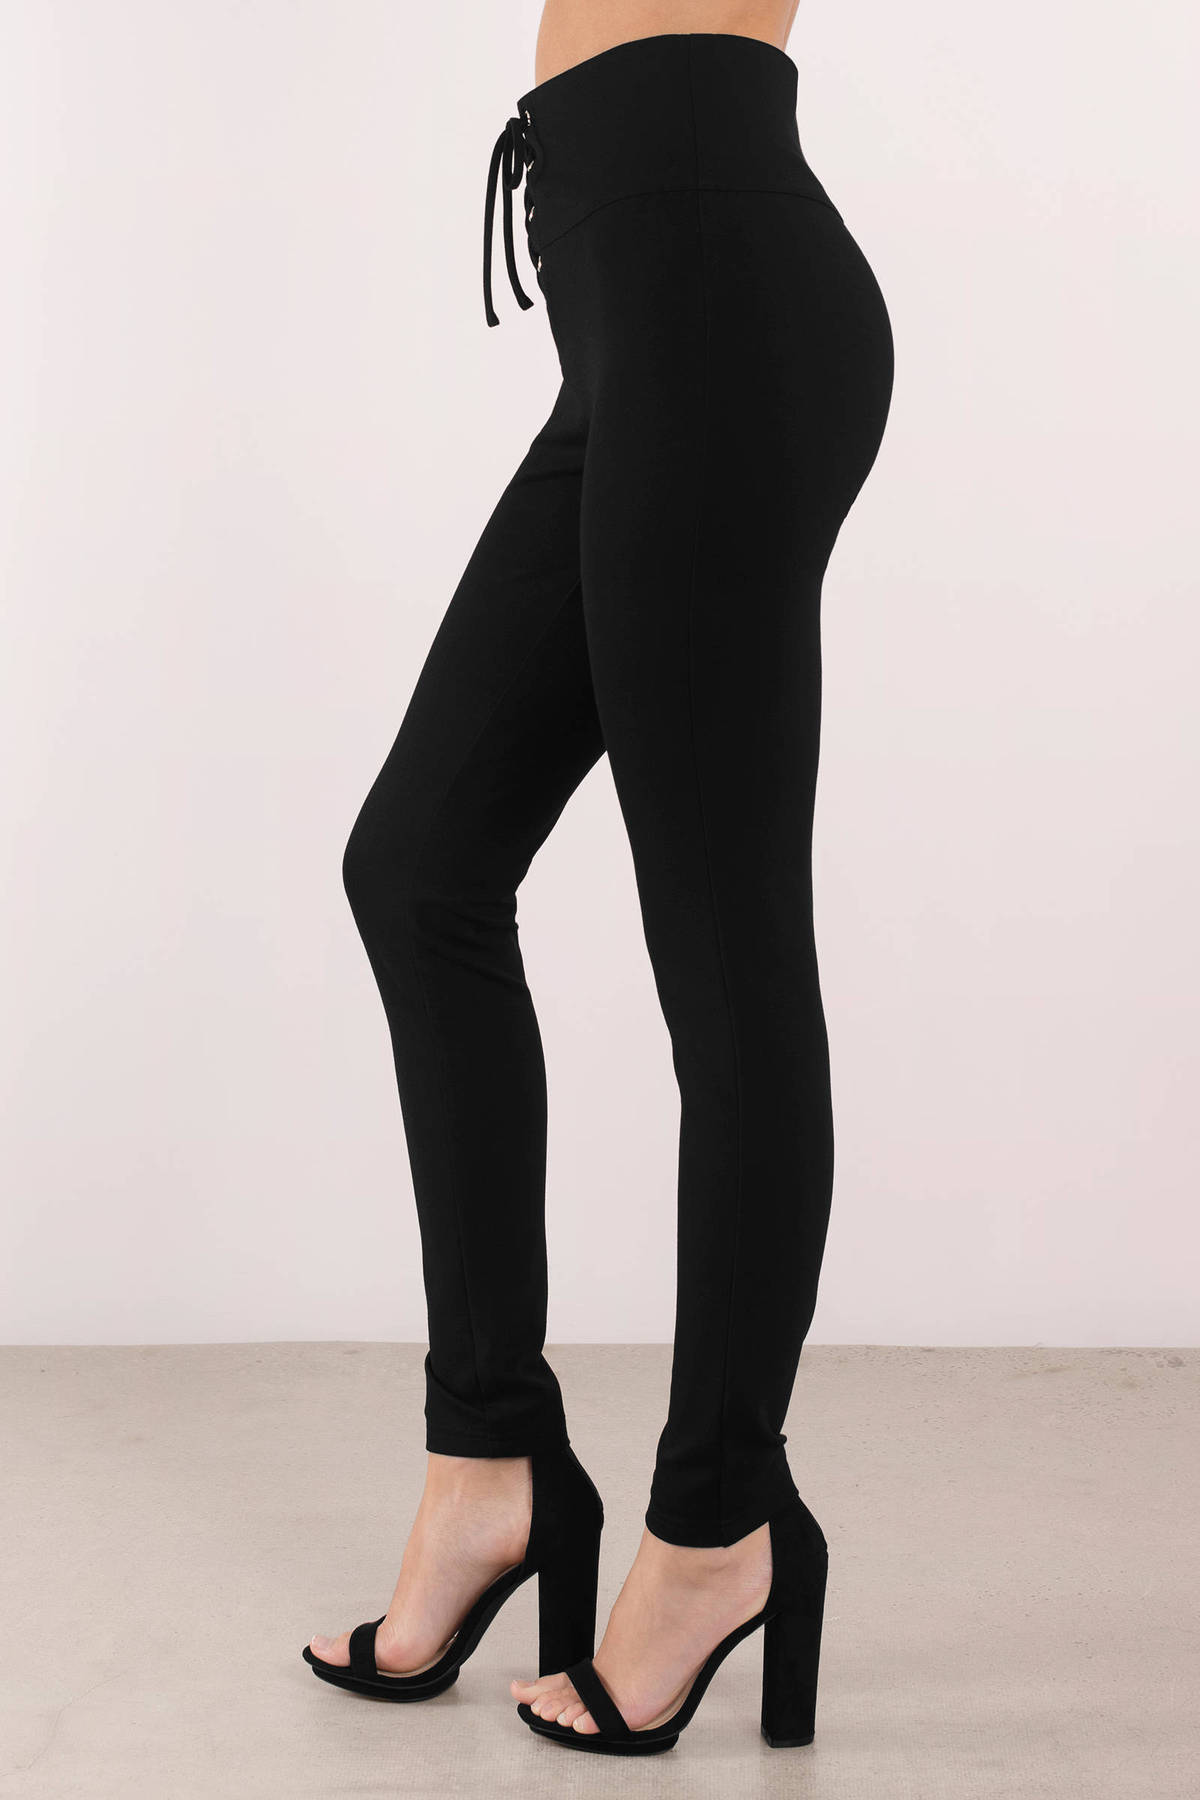 Keep It Casual Lace Up Front Leggings in Black - $27 | Tobi US